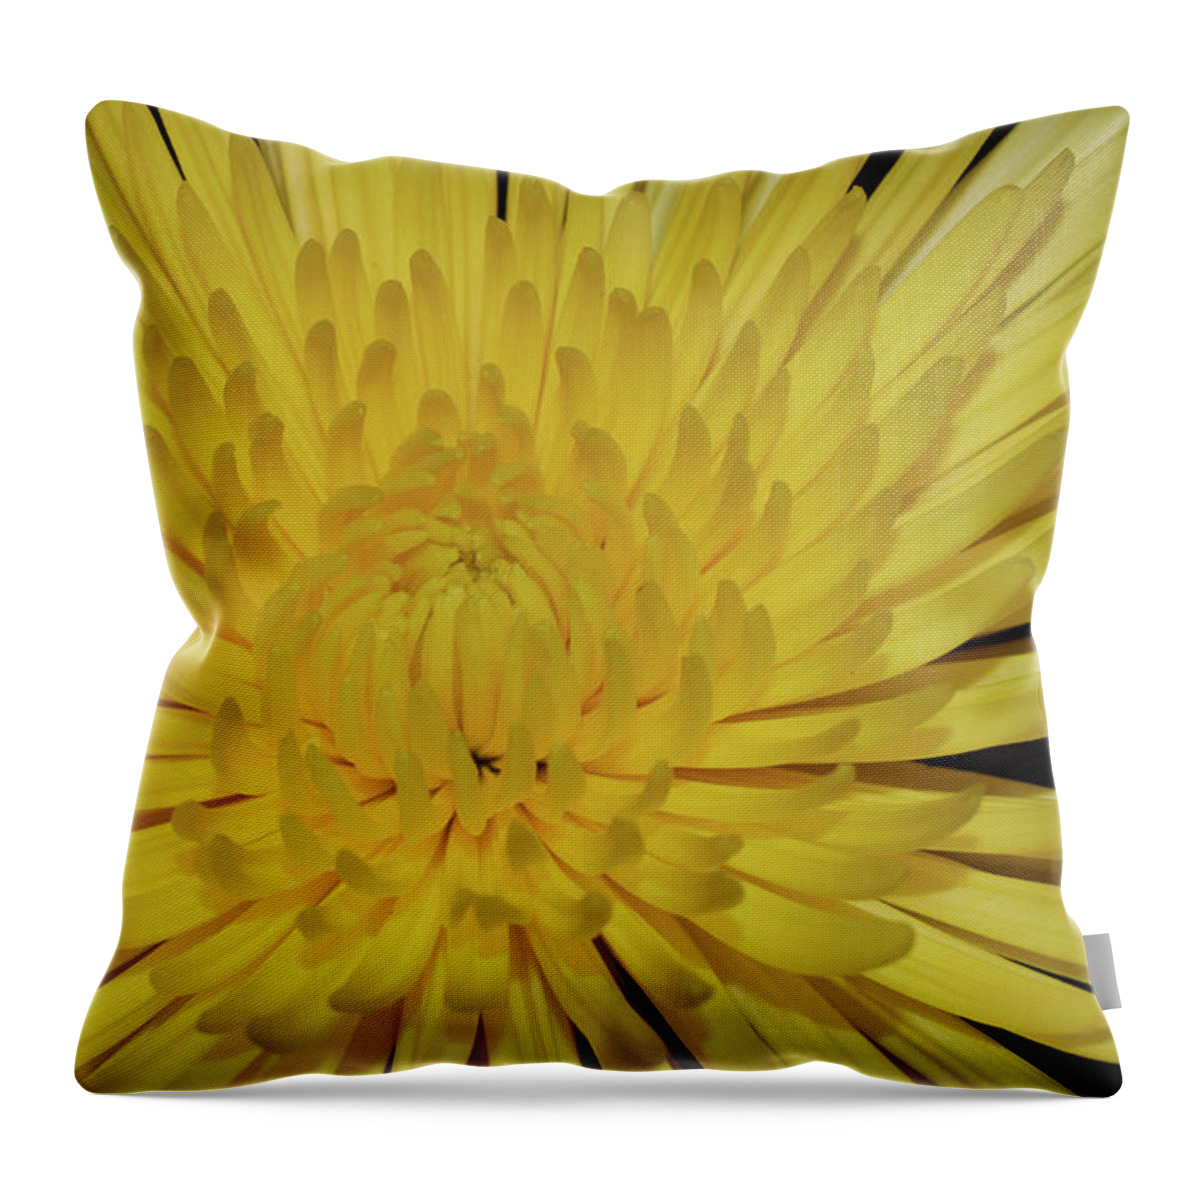 Photograph Throw Pillow featuring the photograph Yellow Mum by Larah McElroy